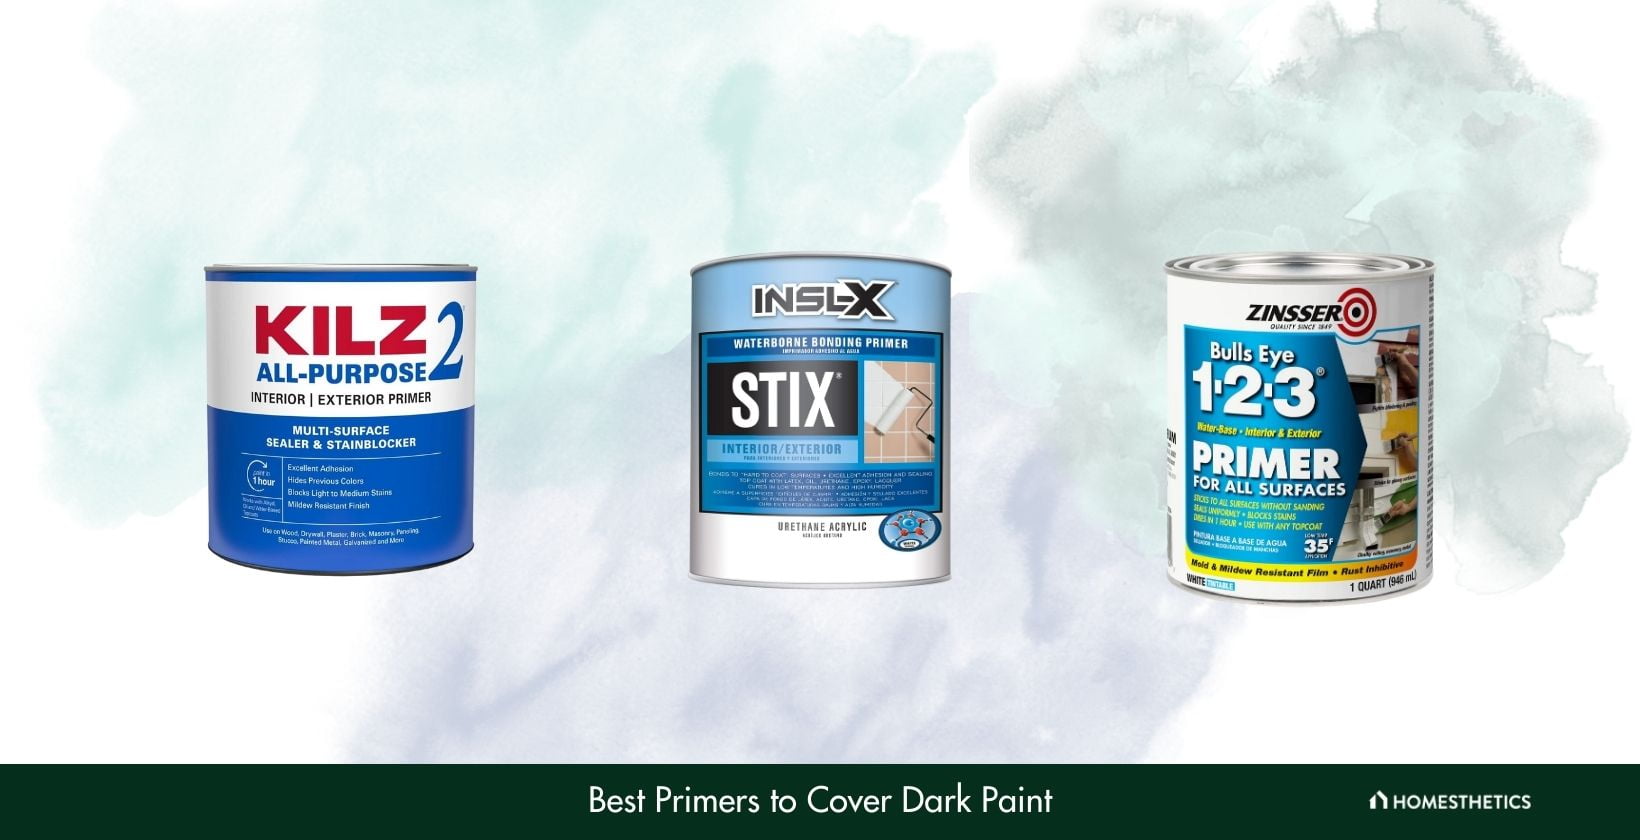 Best Primers to Cover Dark Paint